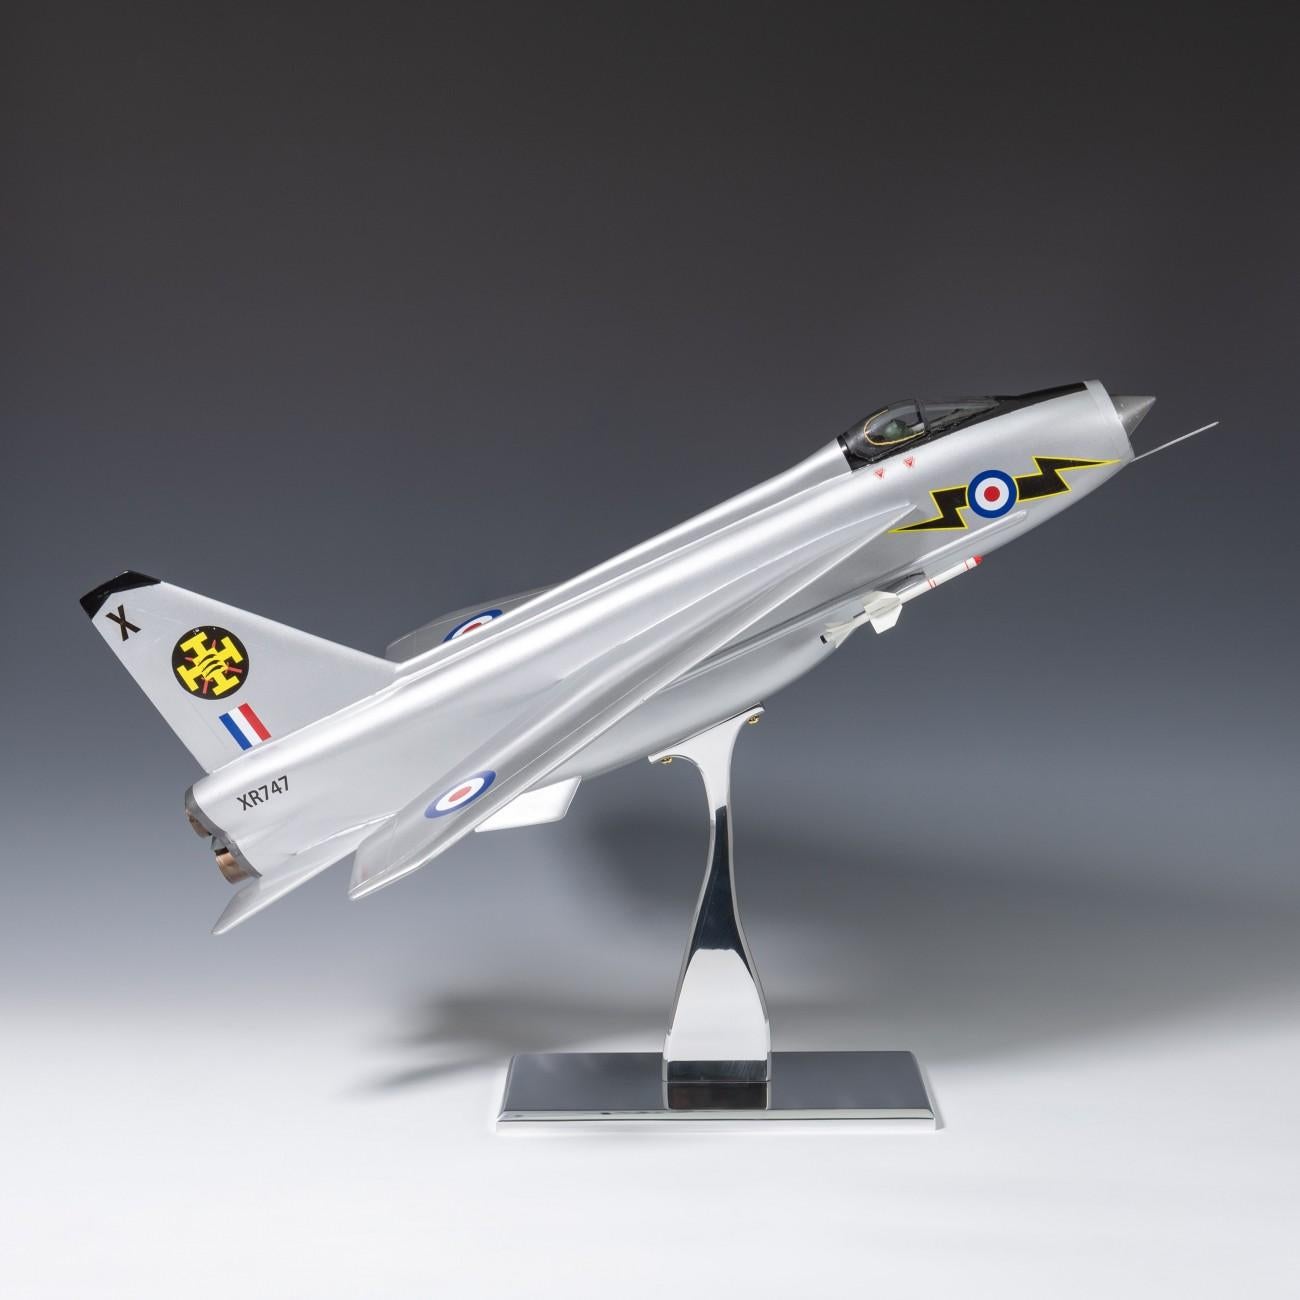 Splendid 1960s painted wooden model of an English electric lightning interceptor aircraft on a newly made polished aluminium stand. The model was a display item for the RAF Air Cadets.
Some work has been carried out to restore the original paint